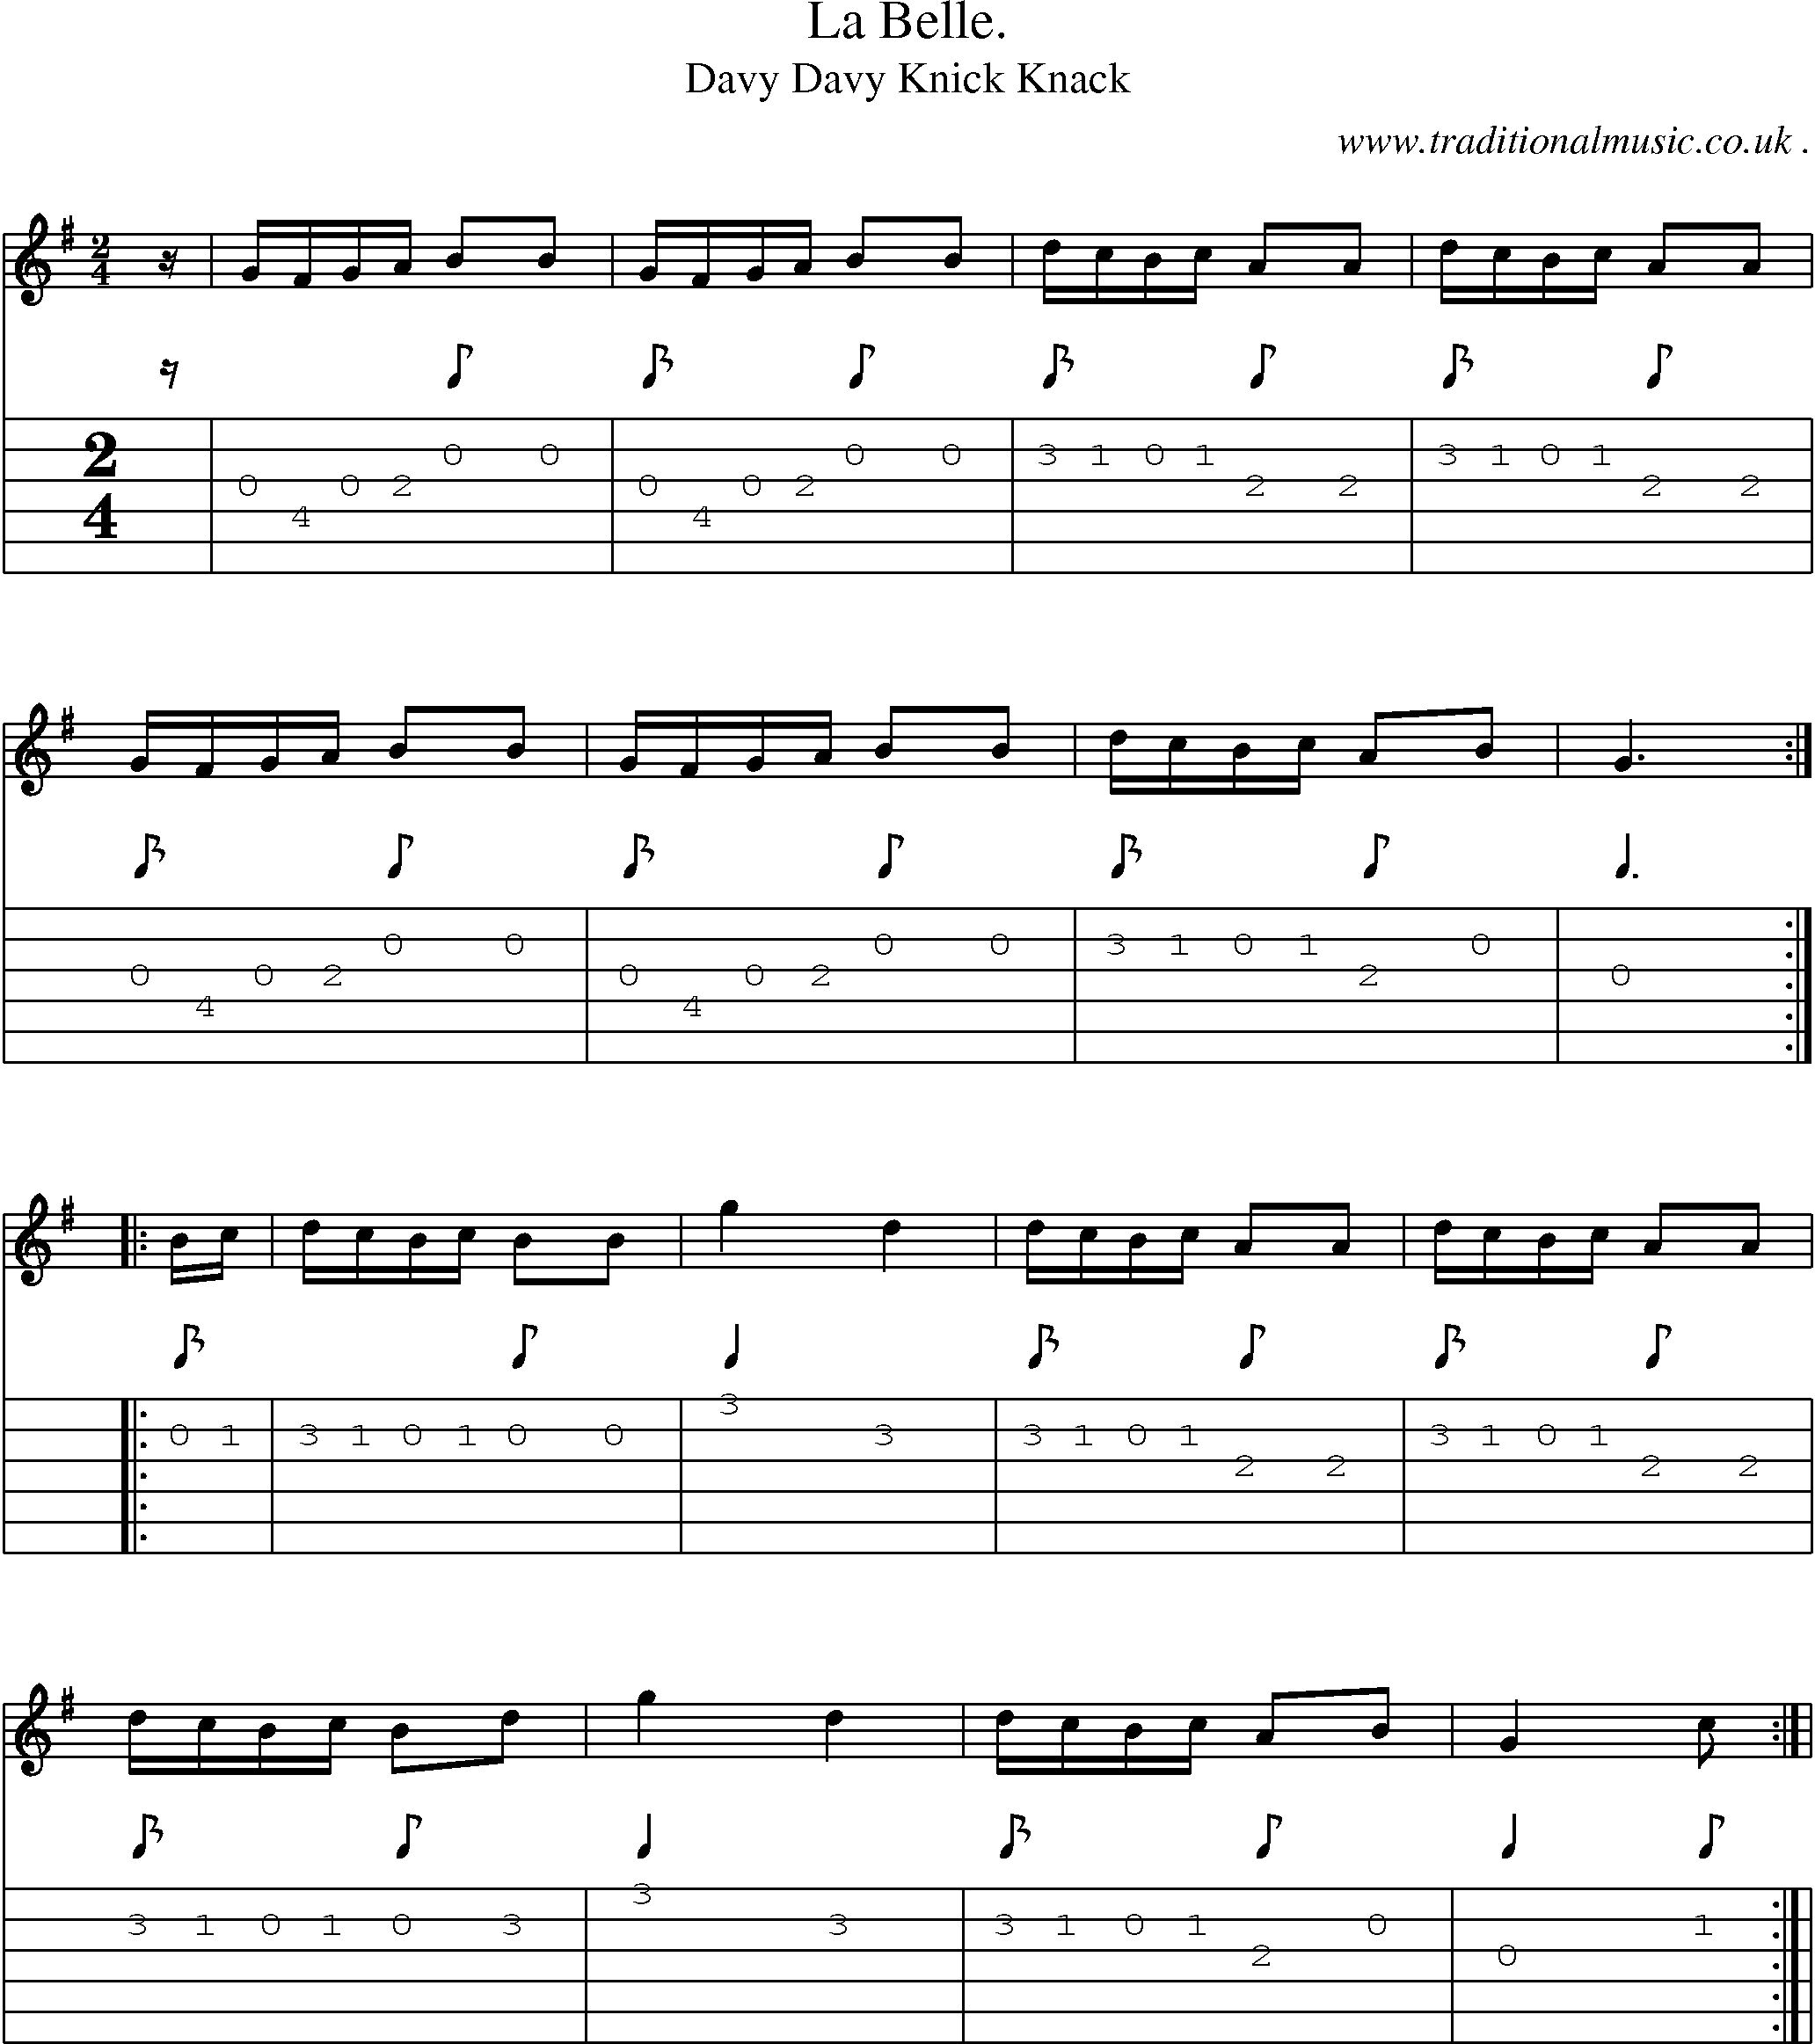 Sheet-Music and Guitar Tabs for La Belle